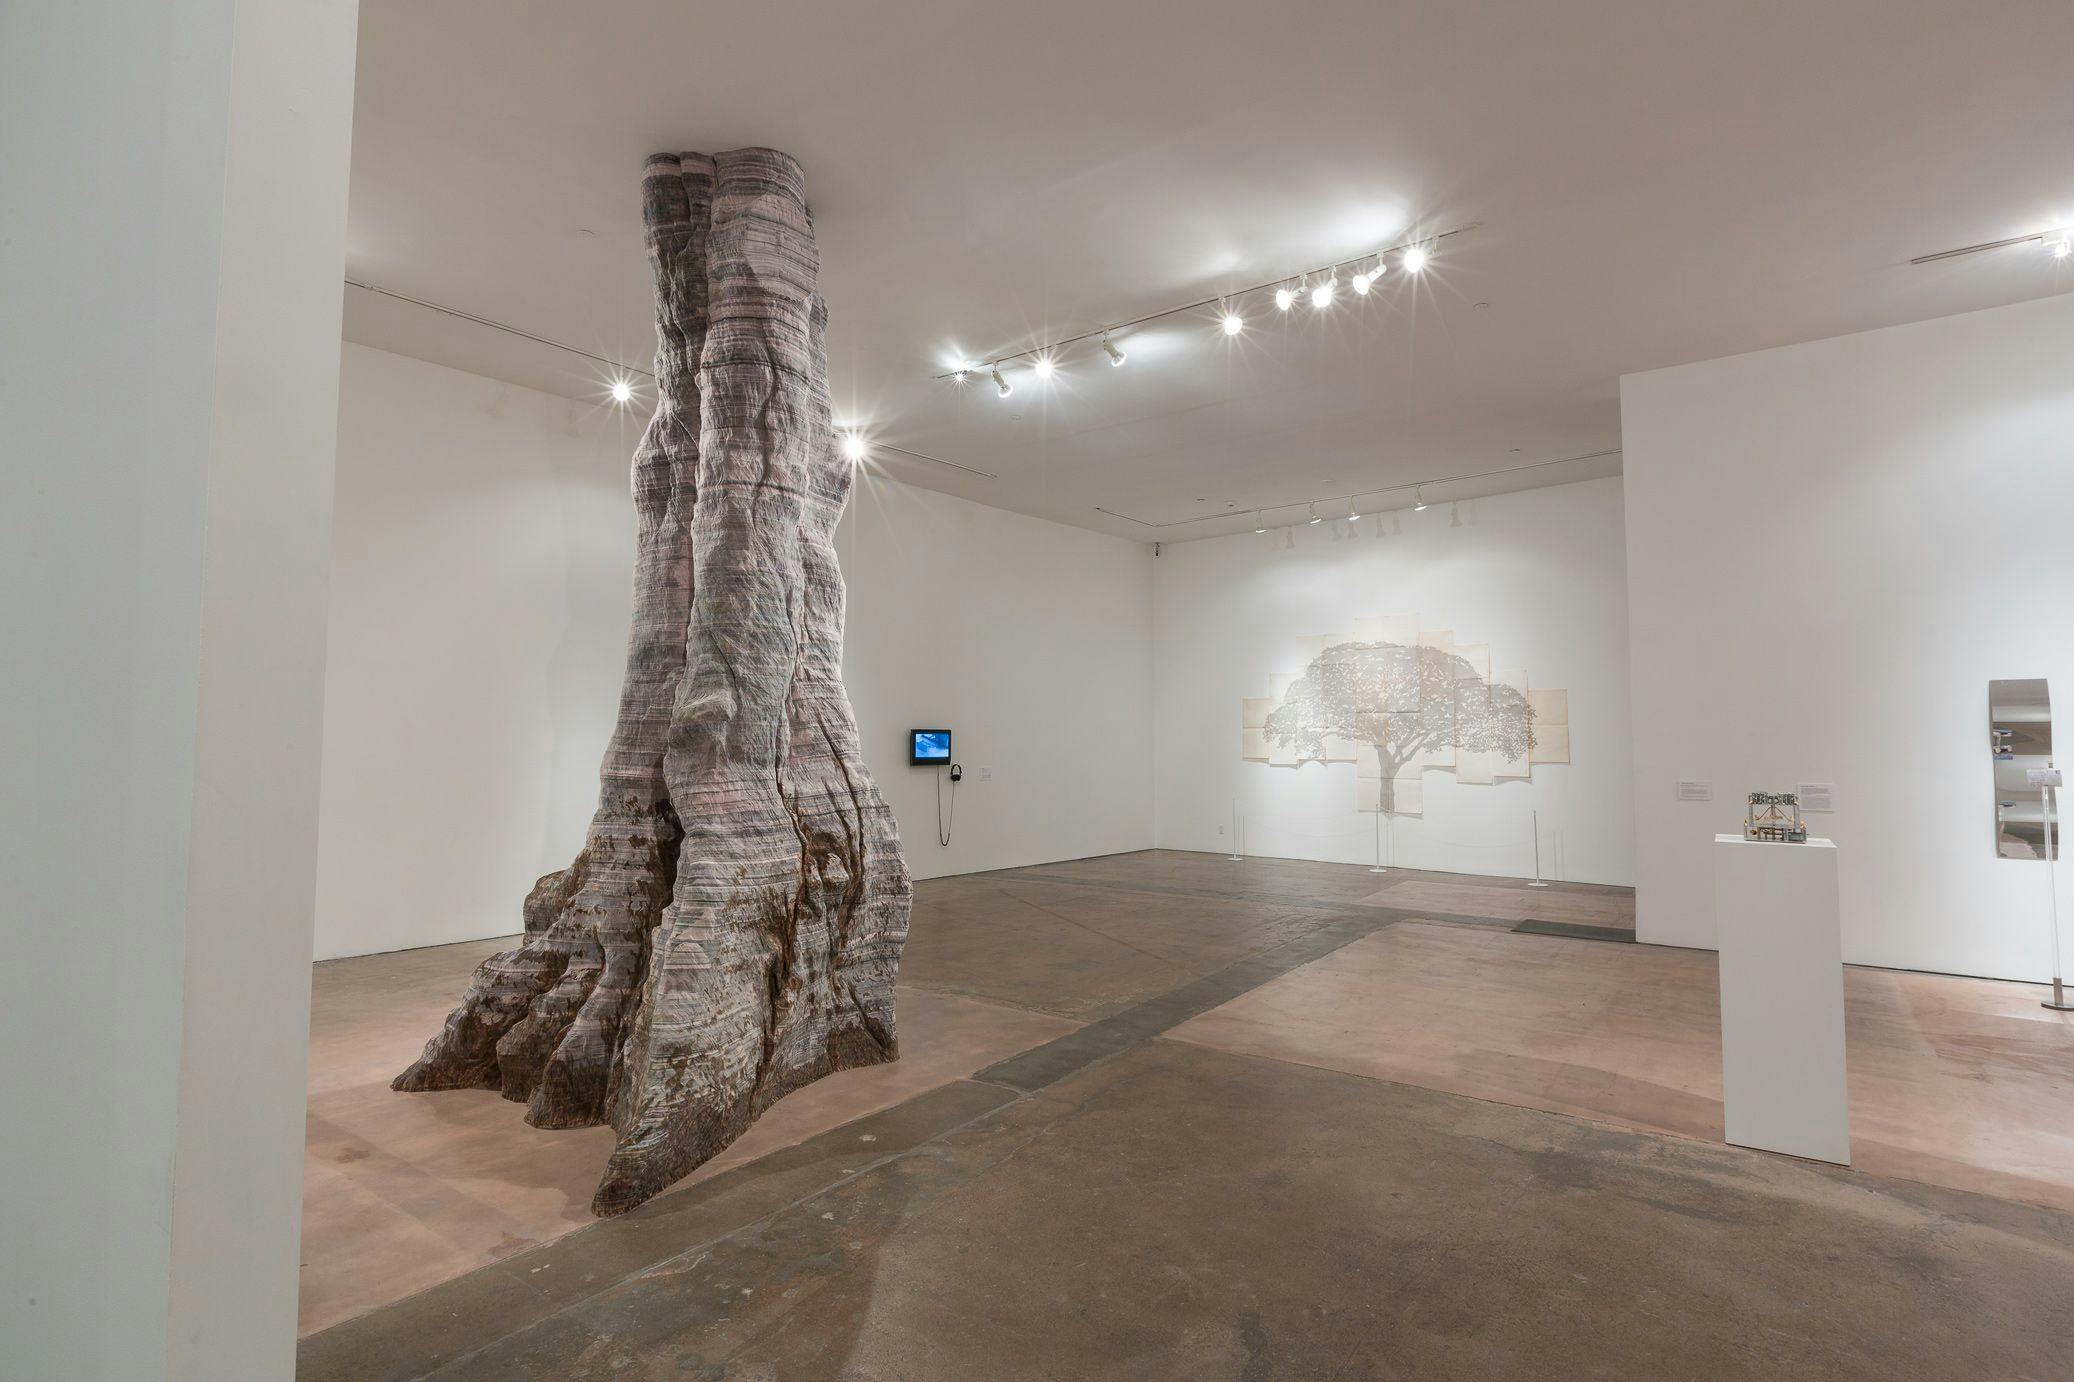 Installation view, SITElines.2014: Unsettled Landscapes, SITE SANTA FE, 2014. Photo by Eric Swanson